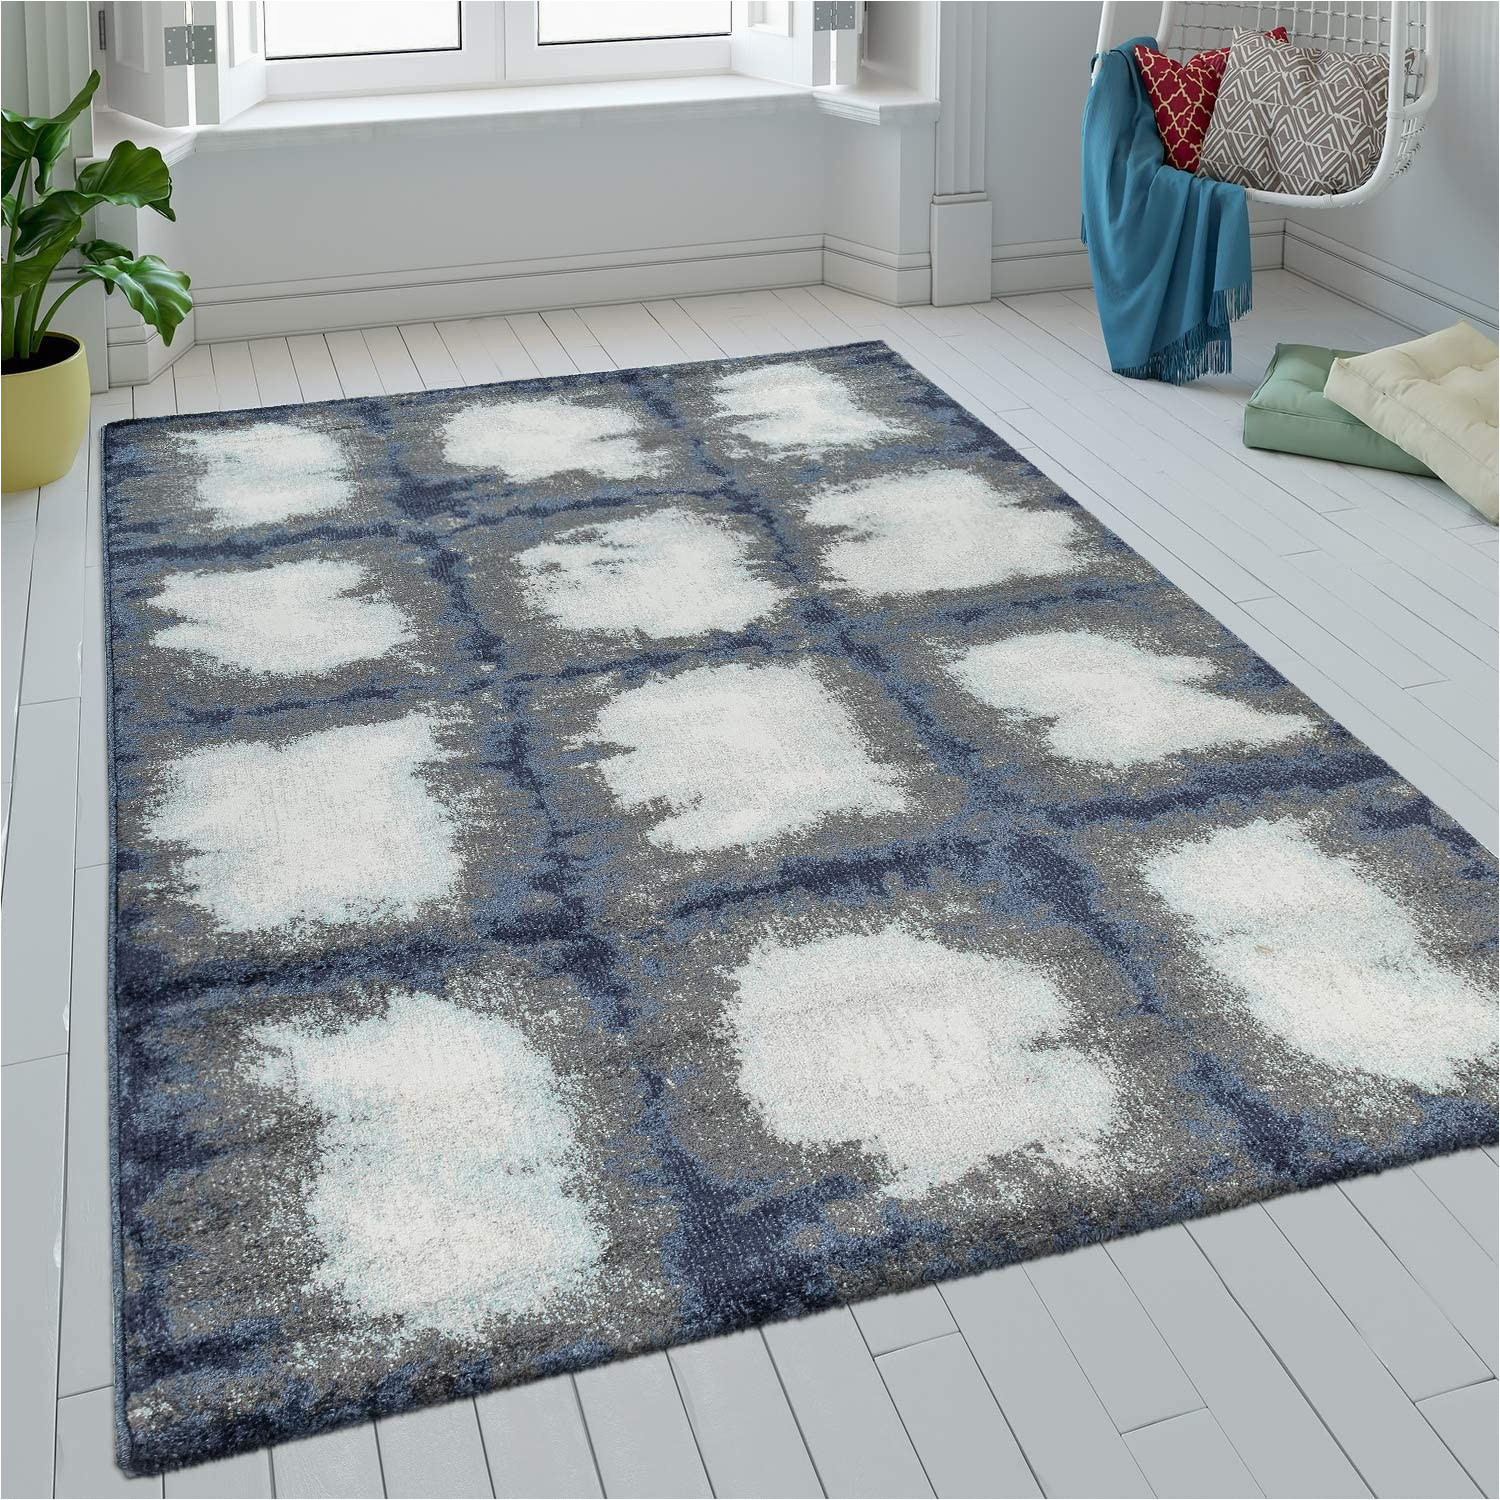 Blue Grey and White Rug Paco Home Rug for Living Room Short Pile Check Design Batik In …